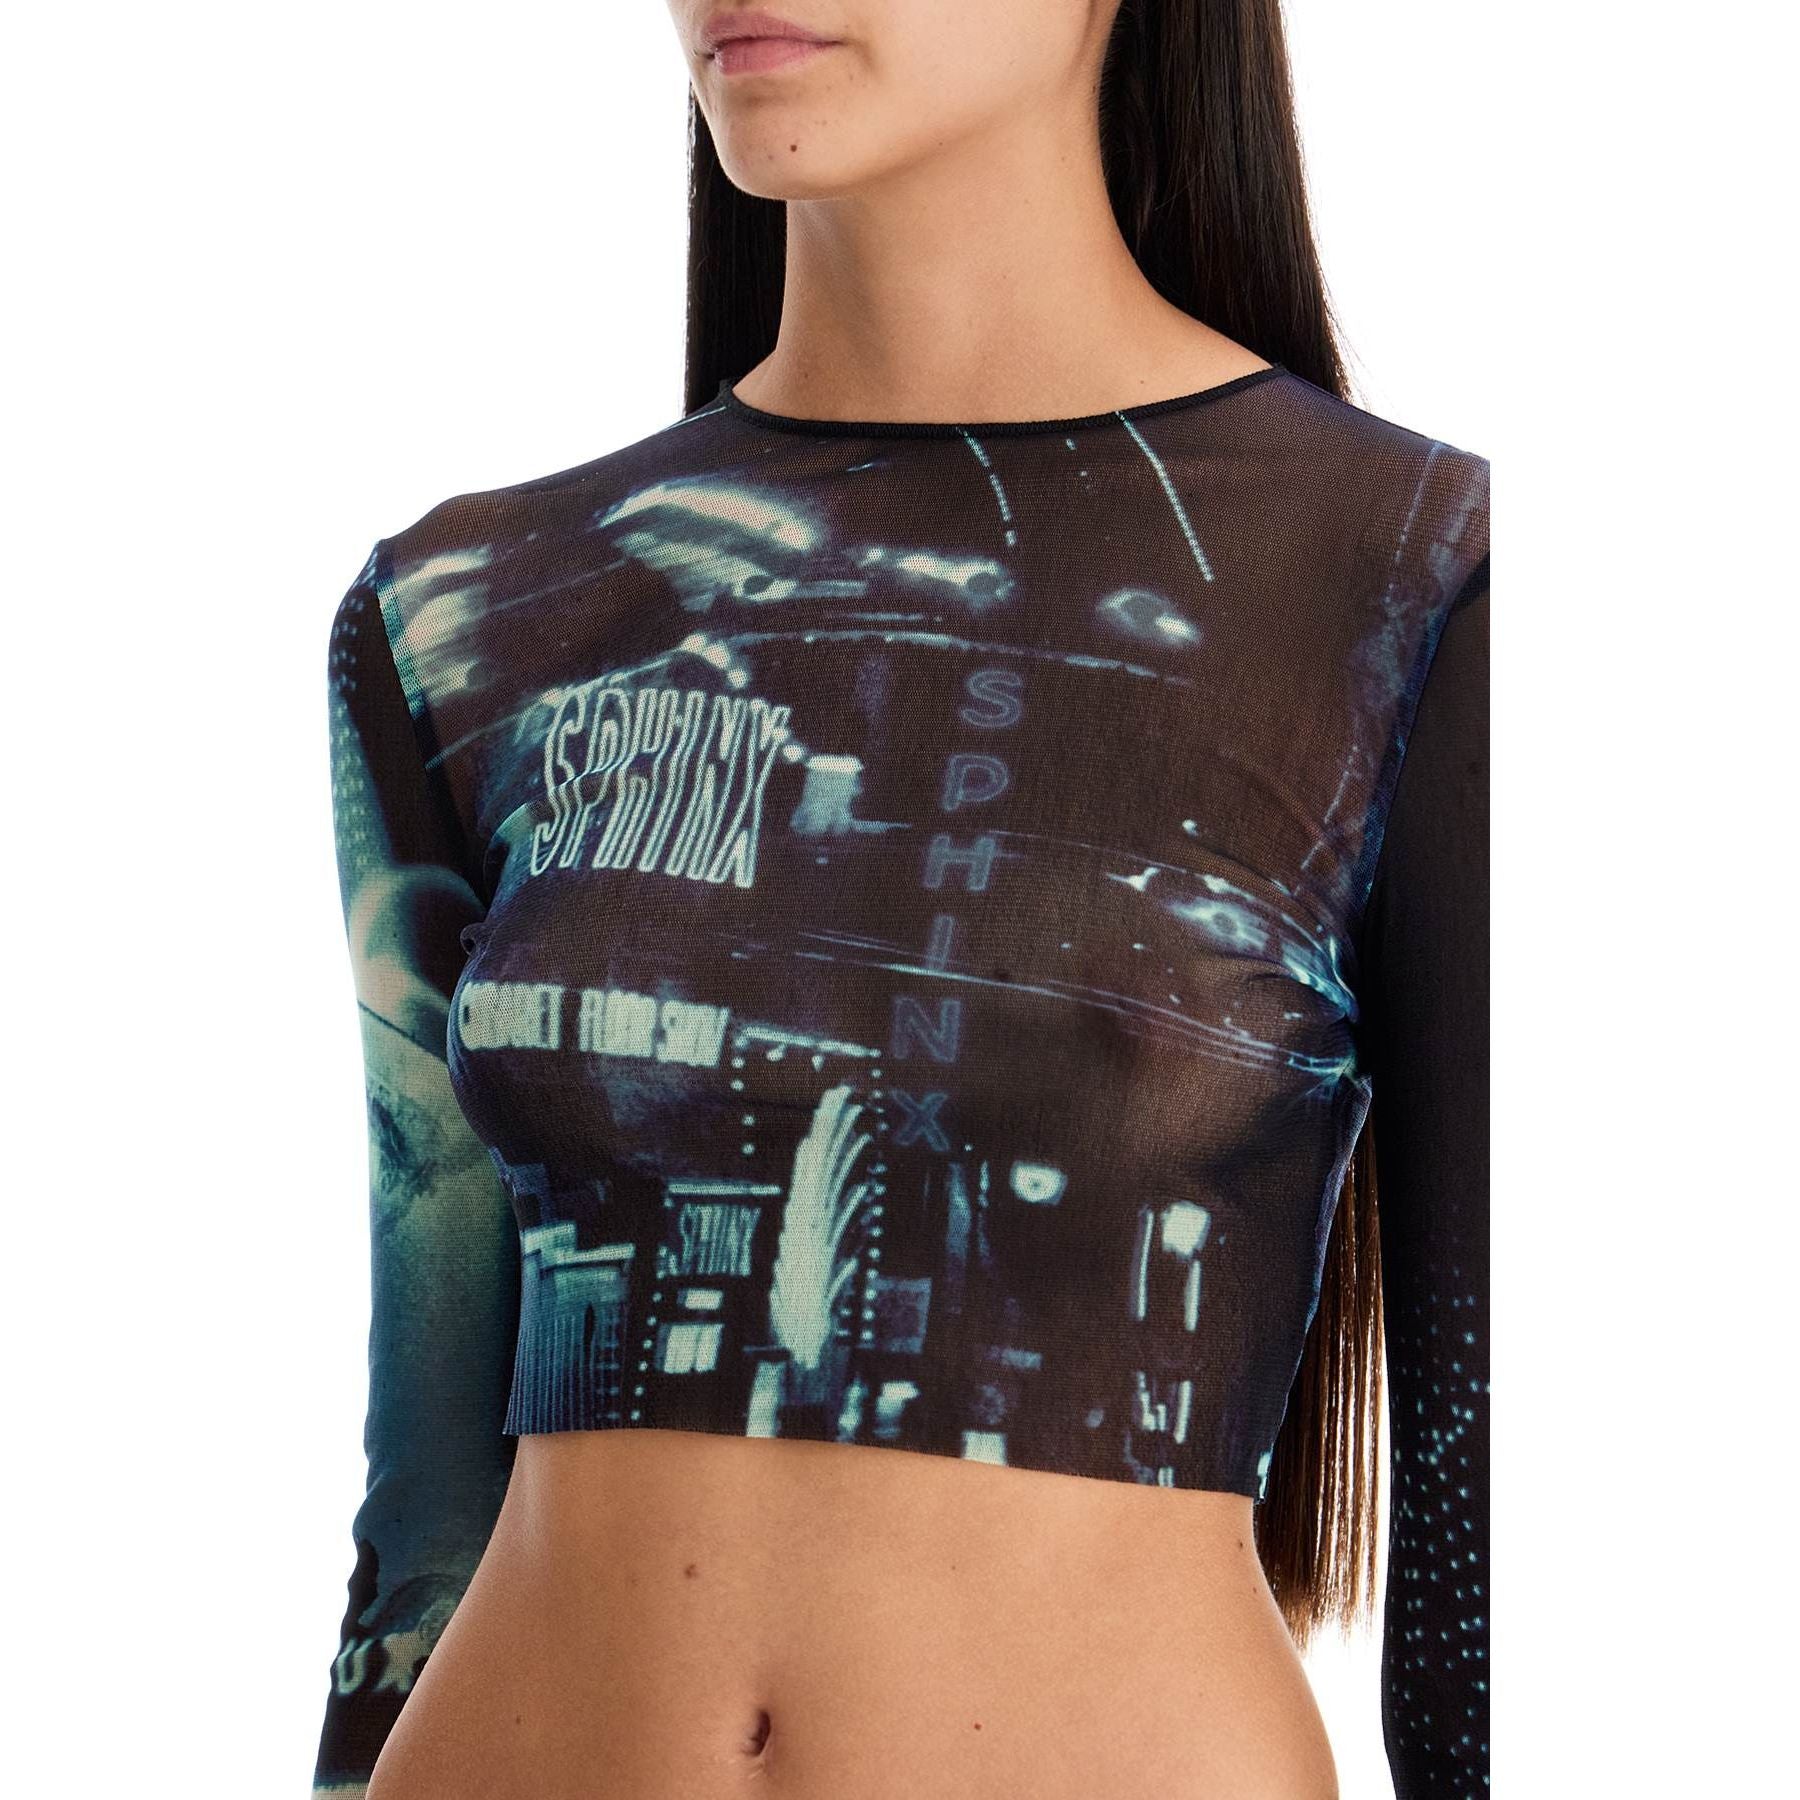 The Blue Pigalle Crop Top